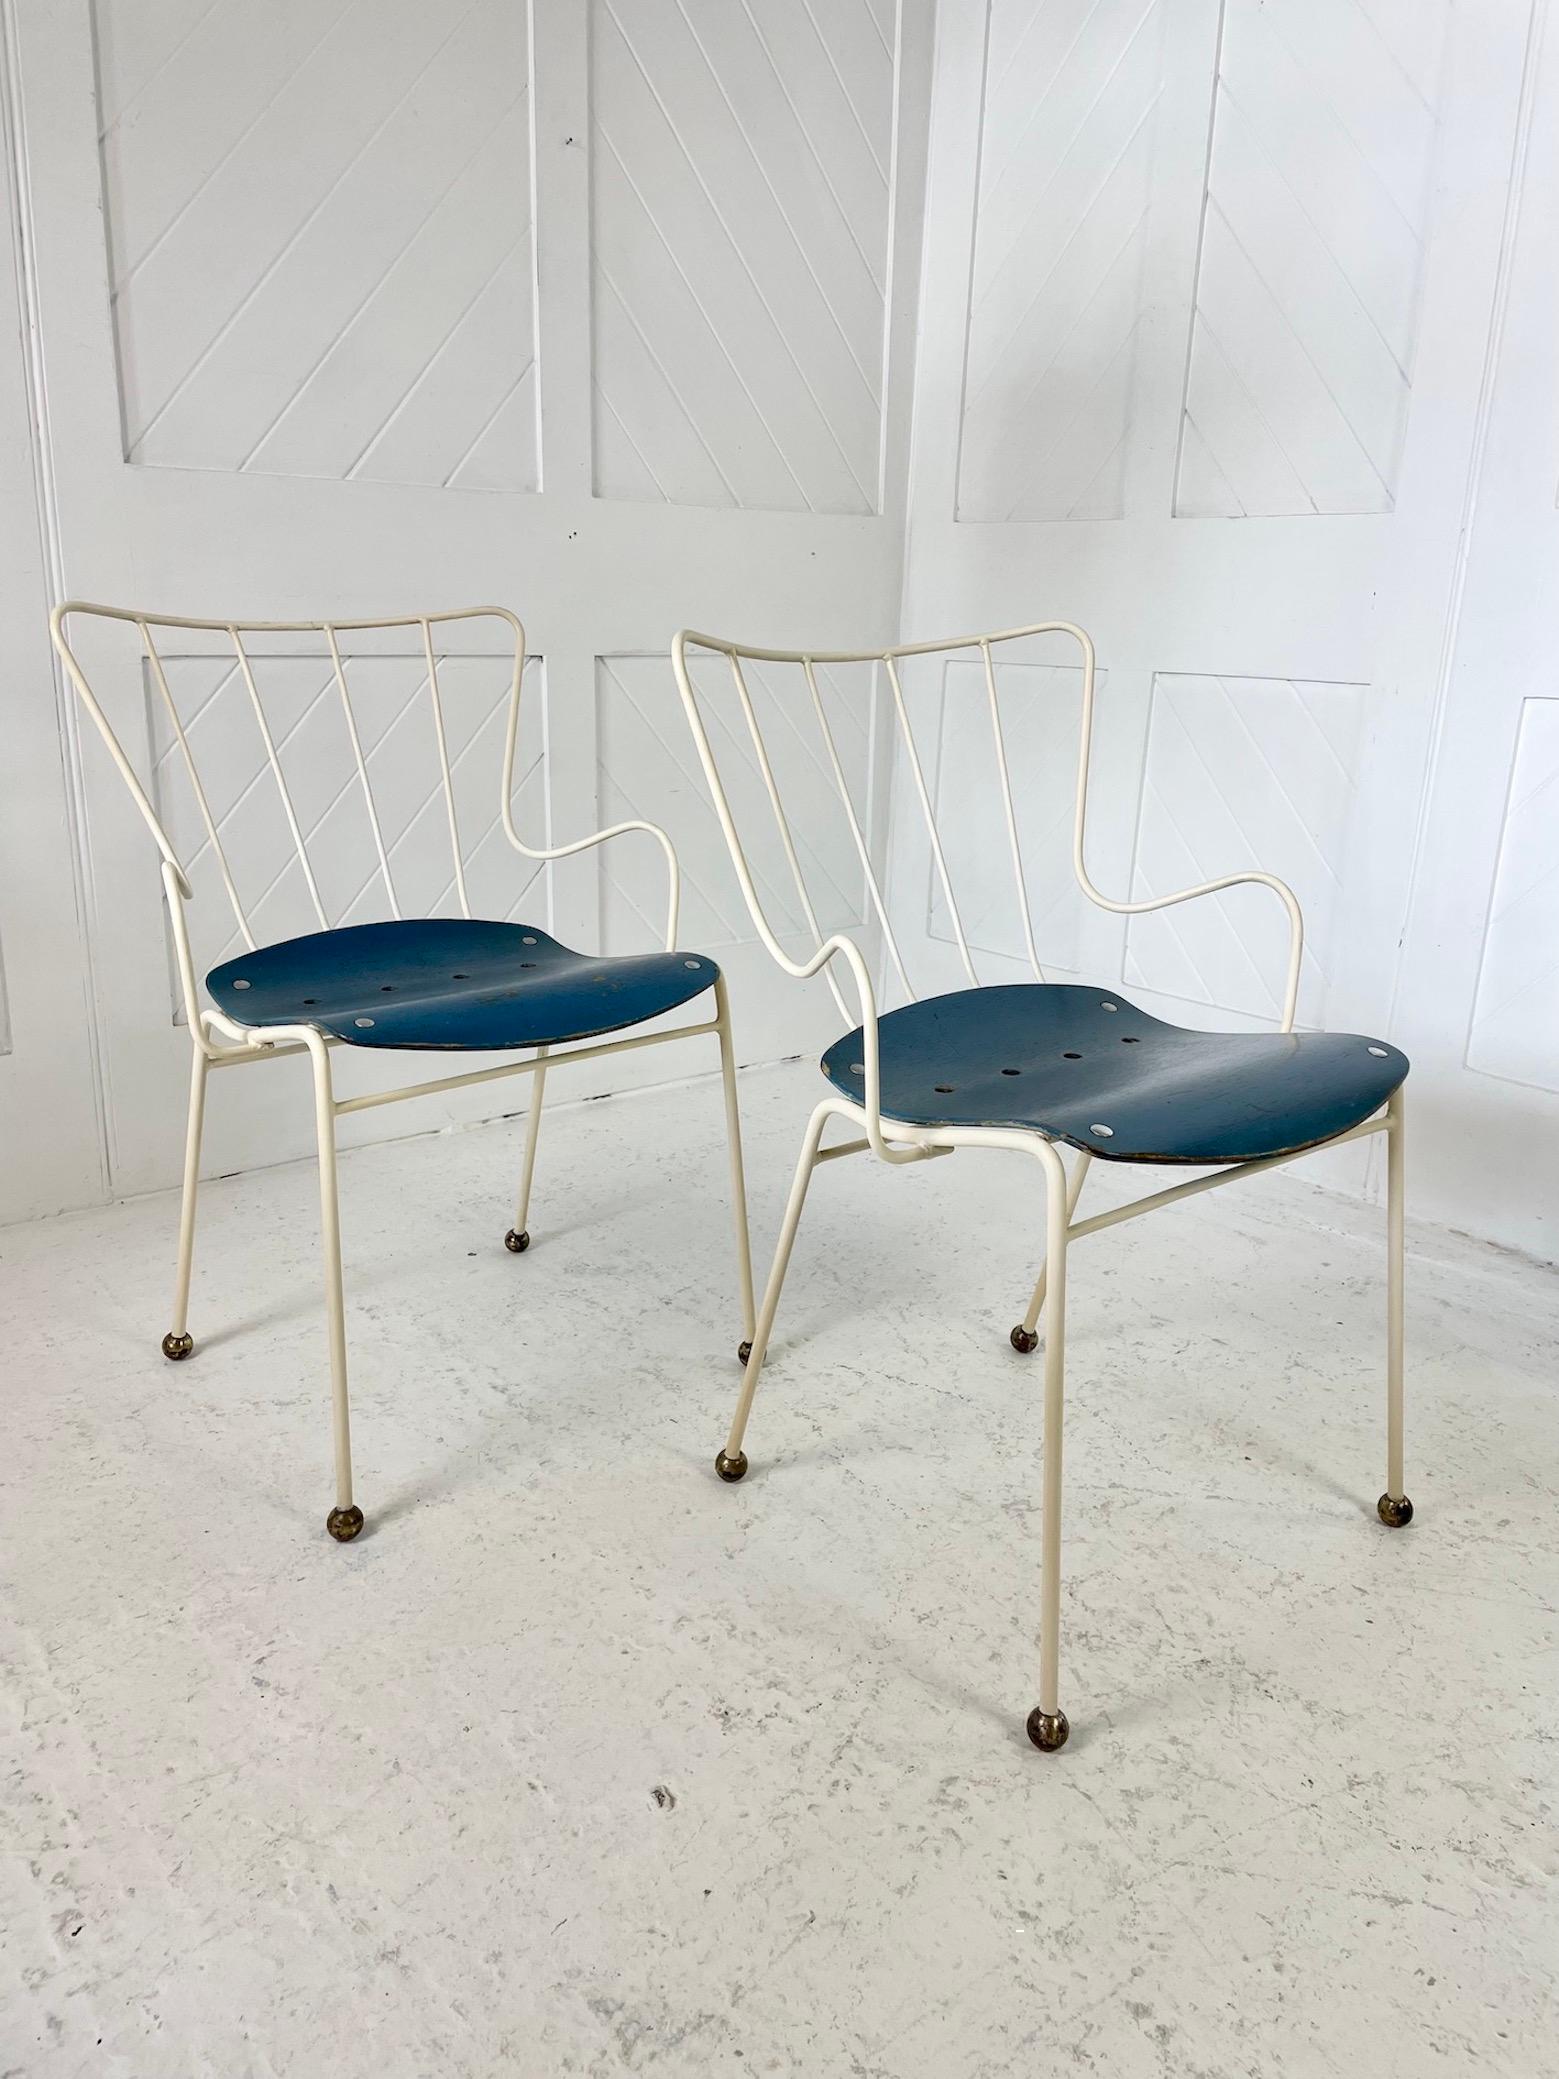 Festival of Britain ‘Antelope’ pair of chairs designed by Ernest Race and made by Ernest Race Ltd. Designed for the Festival of Britain 1951 as inside and outside chairs for restaurants and public spaces. Typifying the modern movement, light,